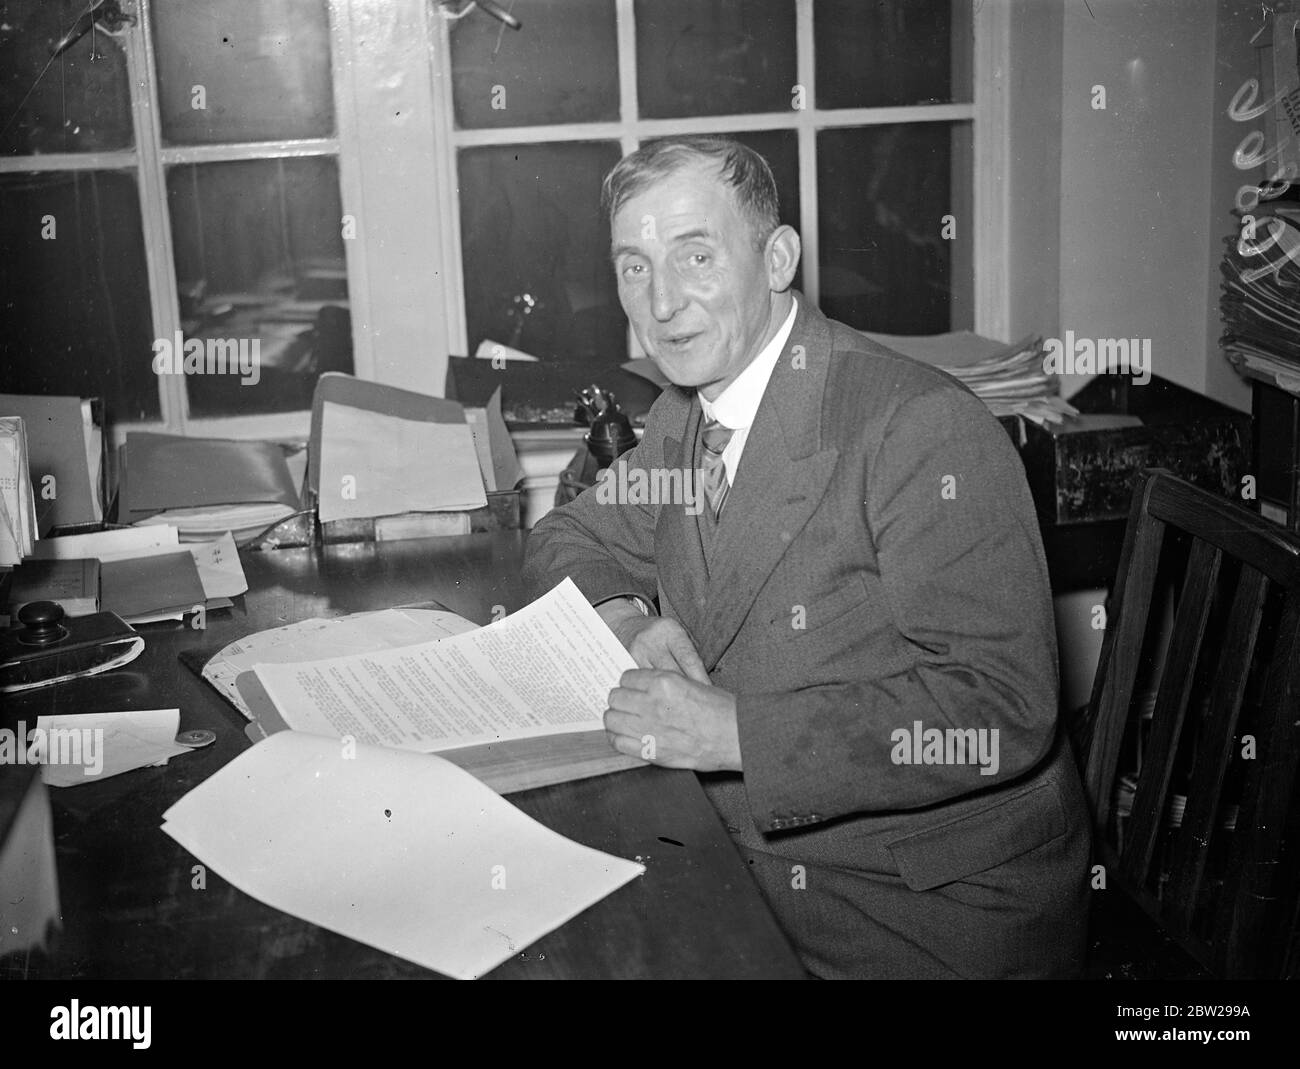 London official has secret meeting with Duke of Windsor in Paris. Discusses British public opinion. A secret meeting in Paris with the Duke of Windsor has just been revealed by Mr E. Page Harry Hayward, head of the Home Department of the Workers Travel Association. Mr Haywood, he was invited to meet the Duke by invitation three third party, had a long interview with the Duke and discussed British public opinion, as it interests Duke, his visit to Germany, the proposed visit to America and social work in Britain. The Duchess of Windsor was present during part of the interview, Mr Haywood descri Stock Photo